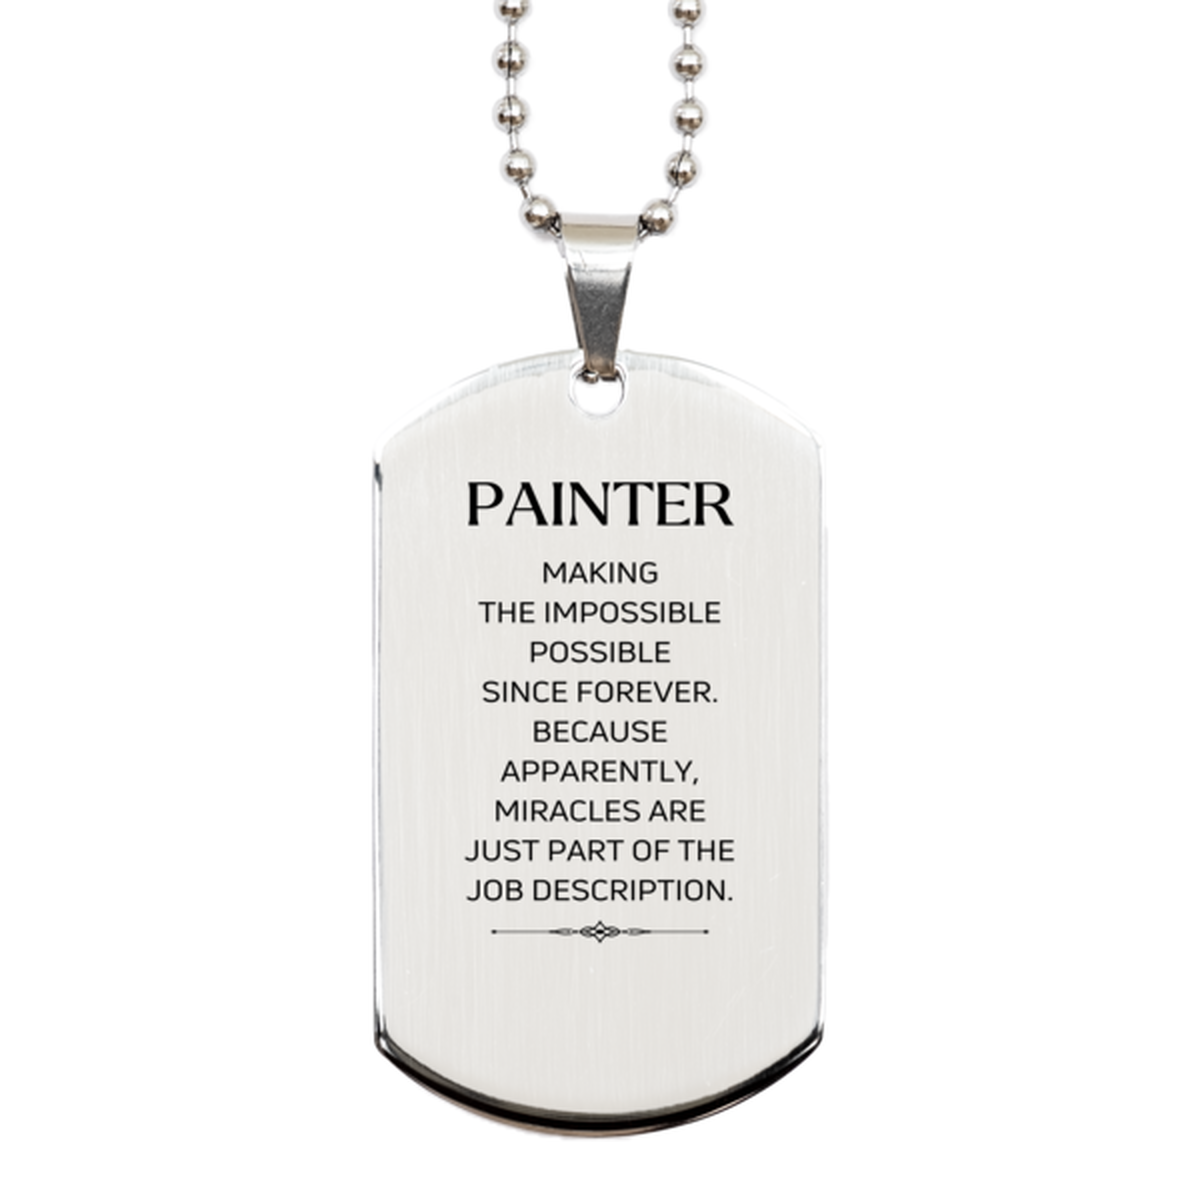 Funny Painter Gifts, Miracles are just part of the job description, Inspirational Birthday Silver Dog Tag For Painter, Men, Women, Coworkers, Friends, Boss